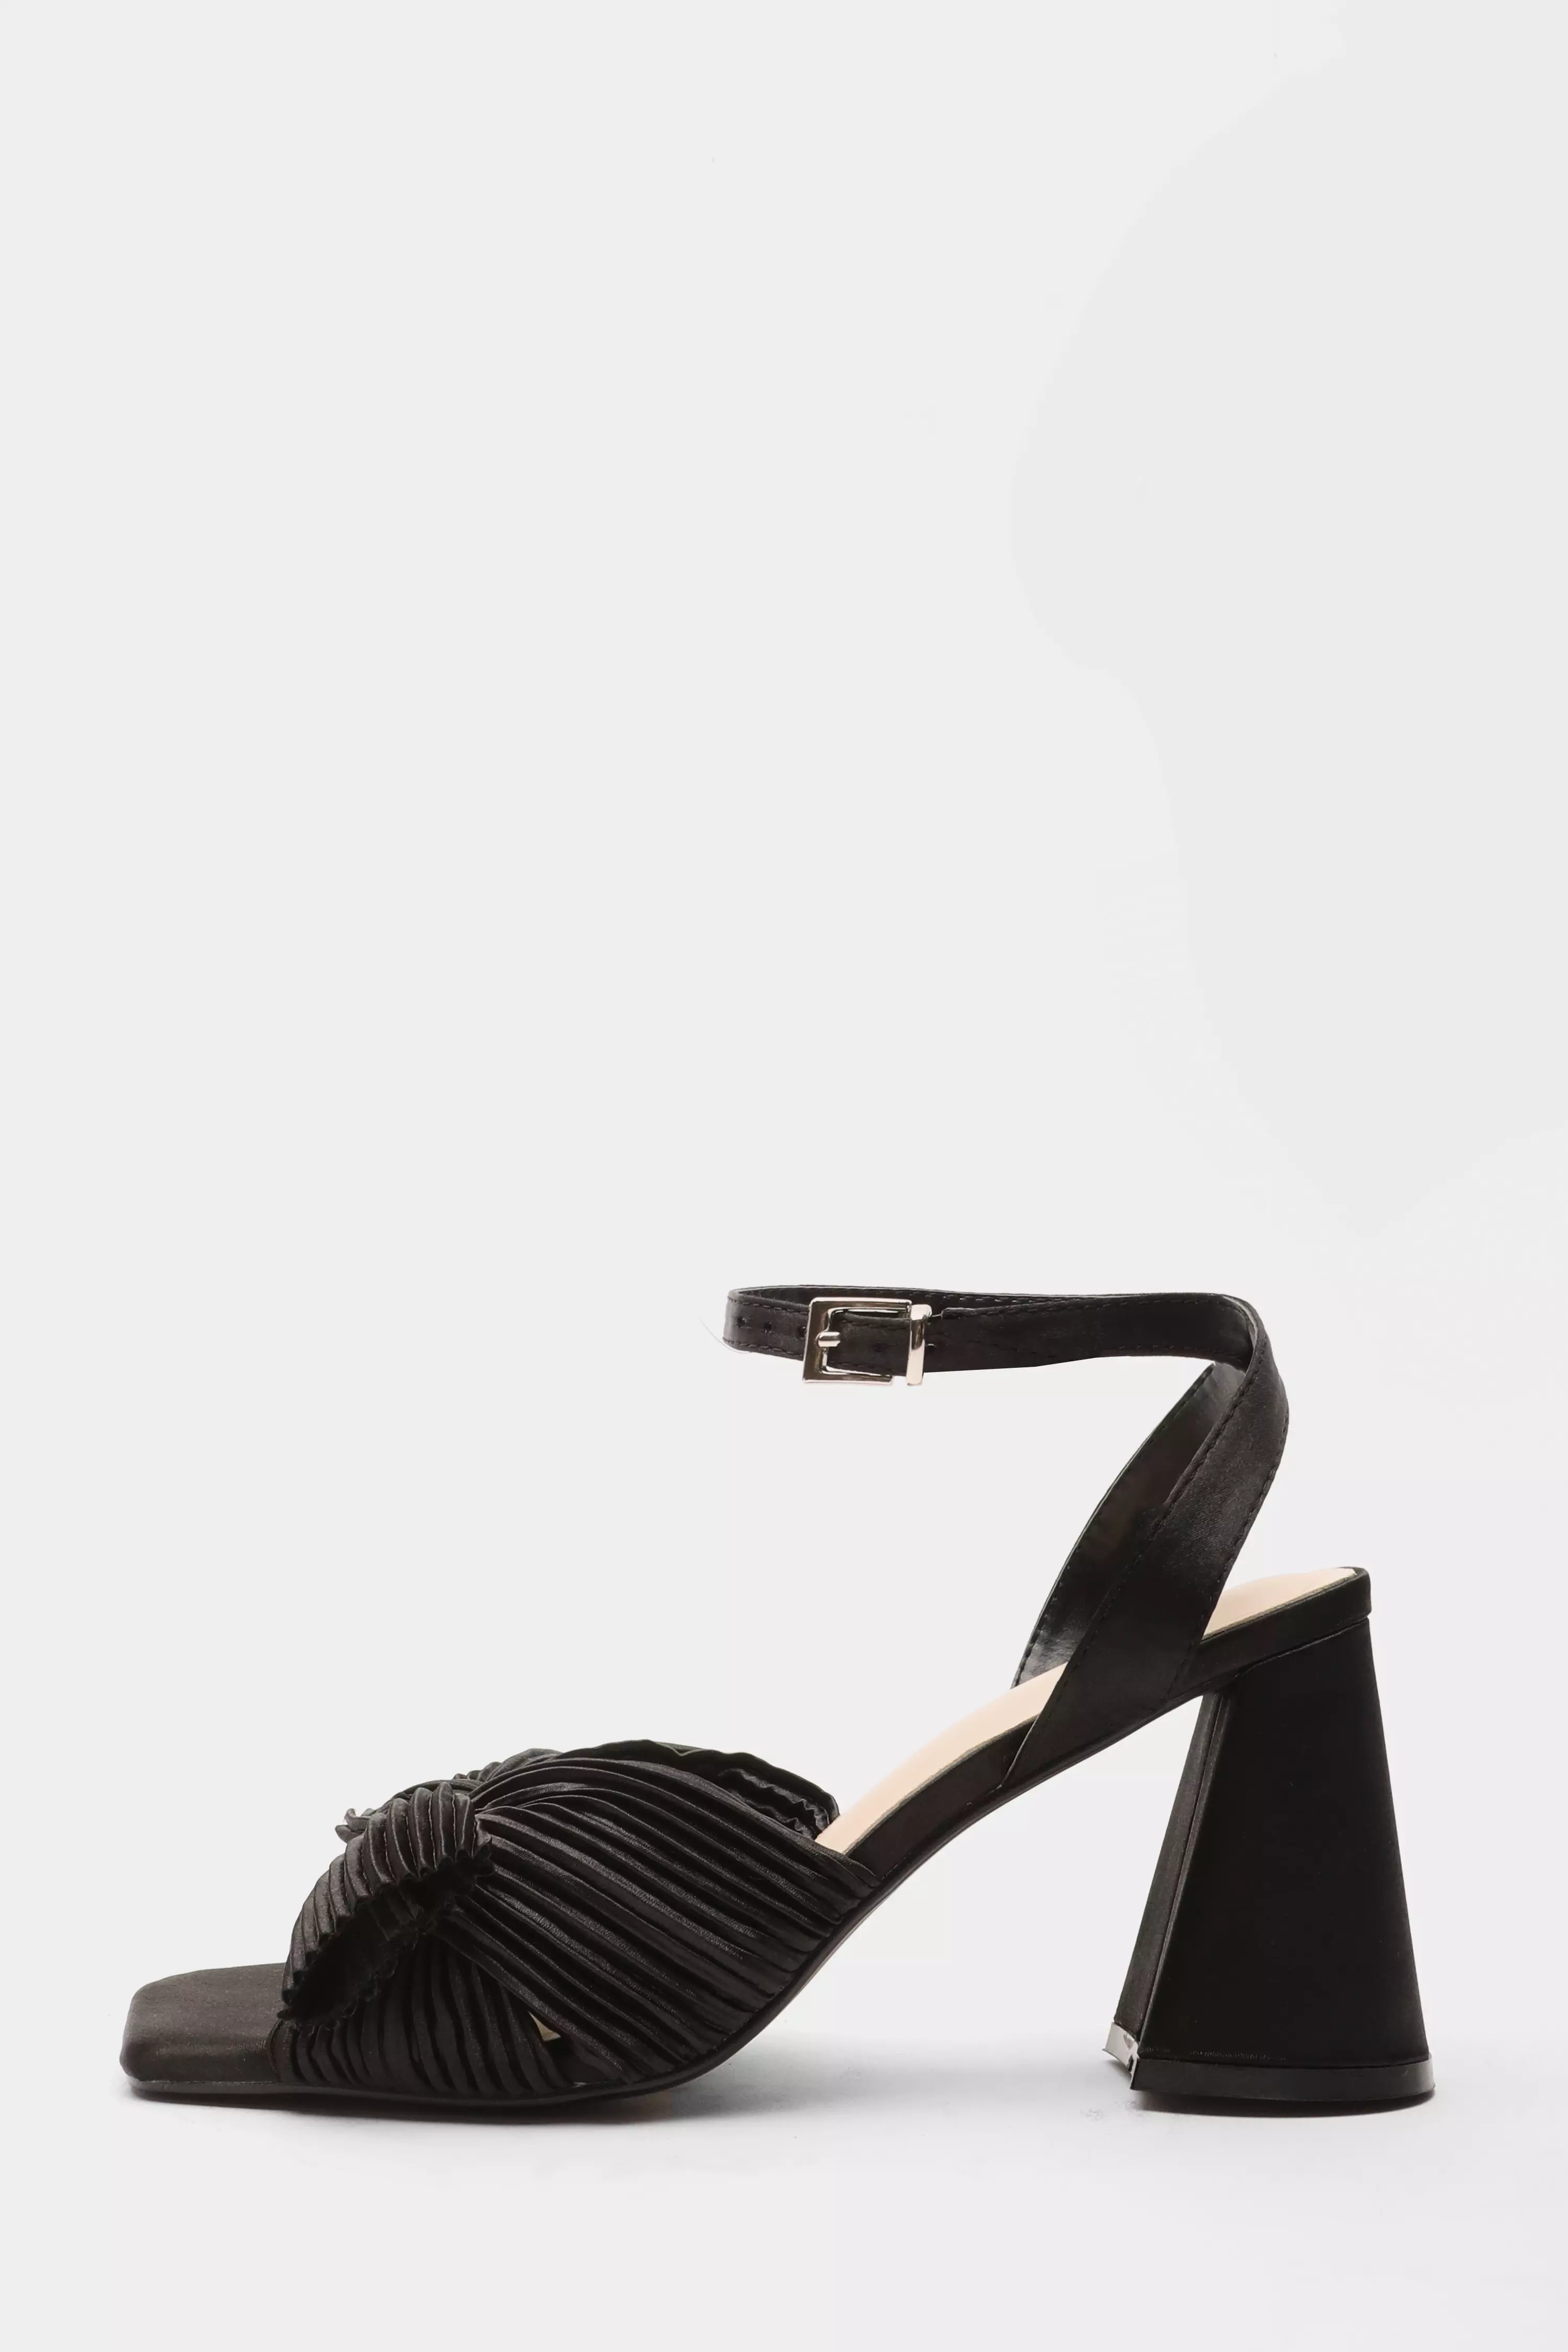 Black Pleated Bow Front Heeled Sandals - QUIZ Clothing